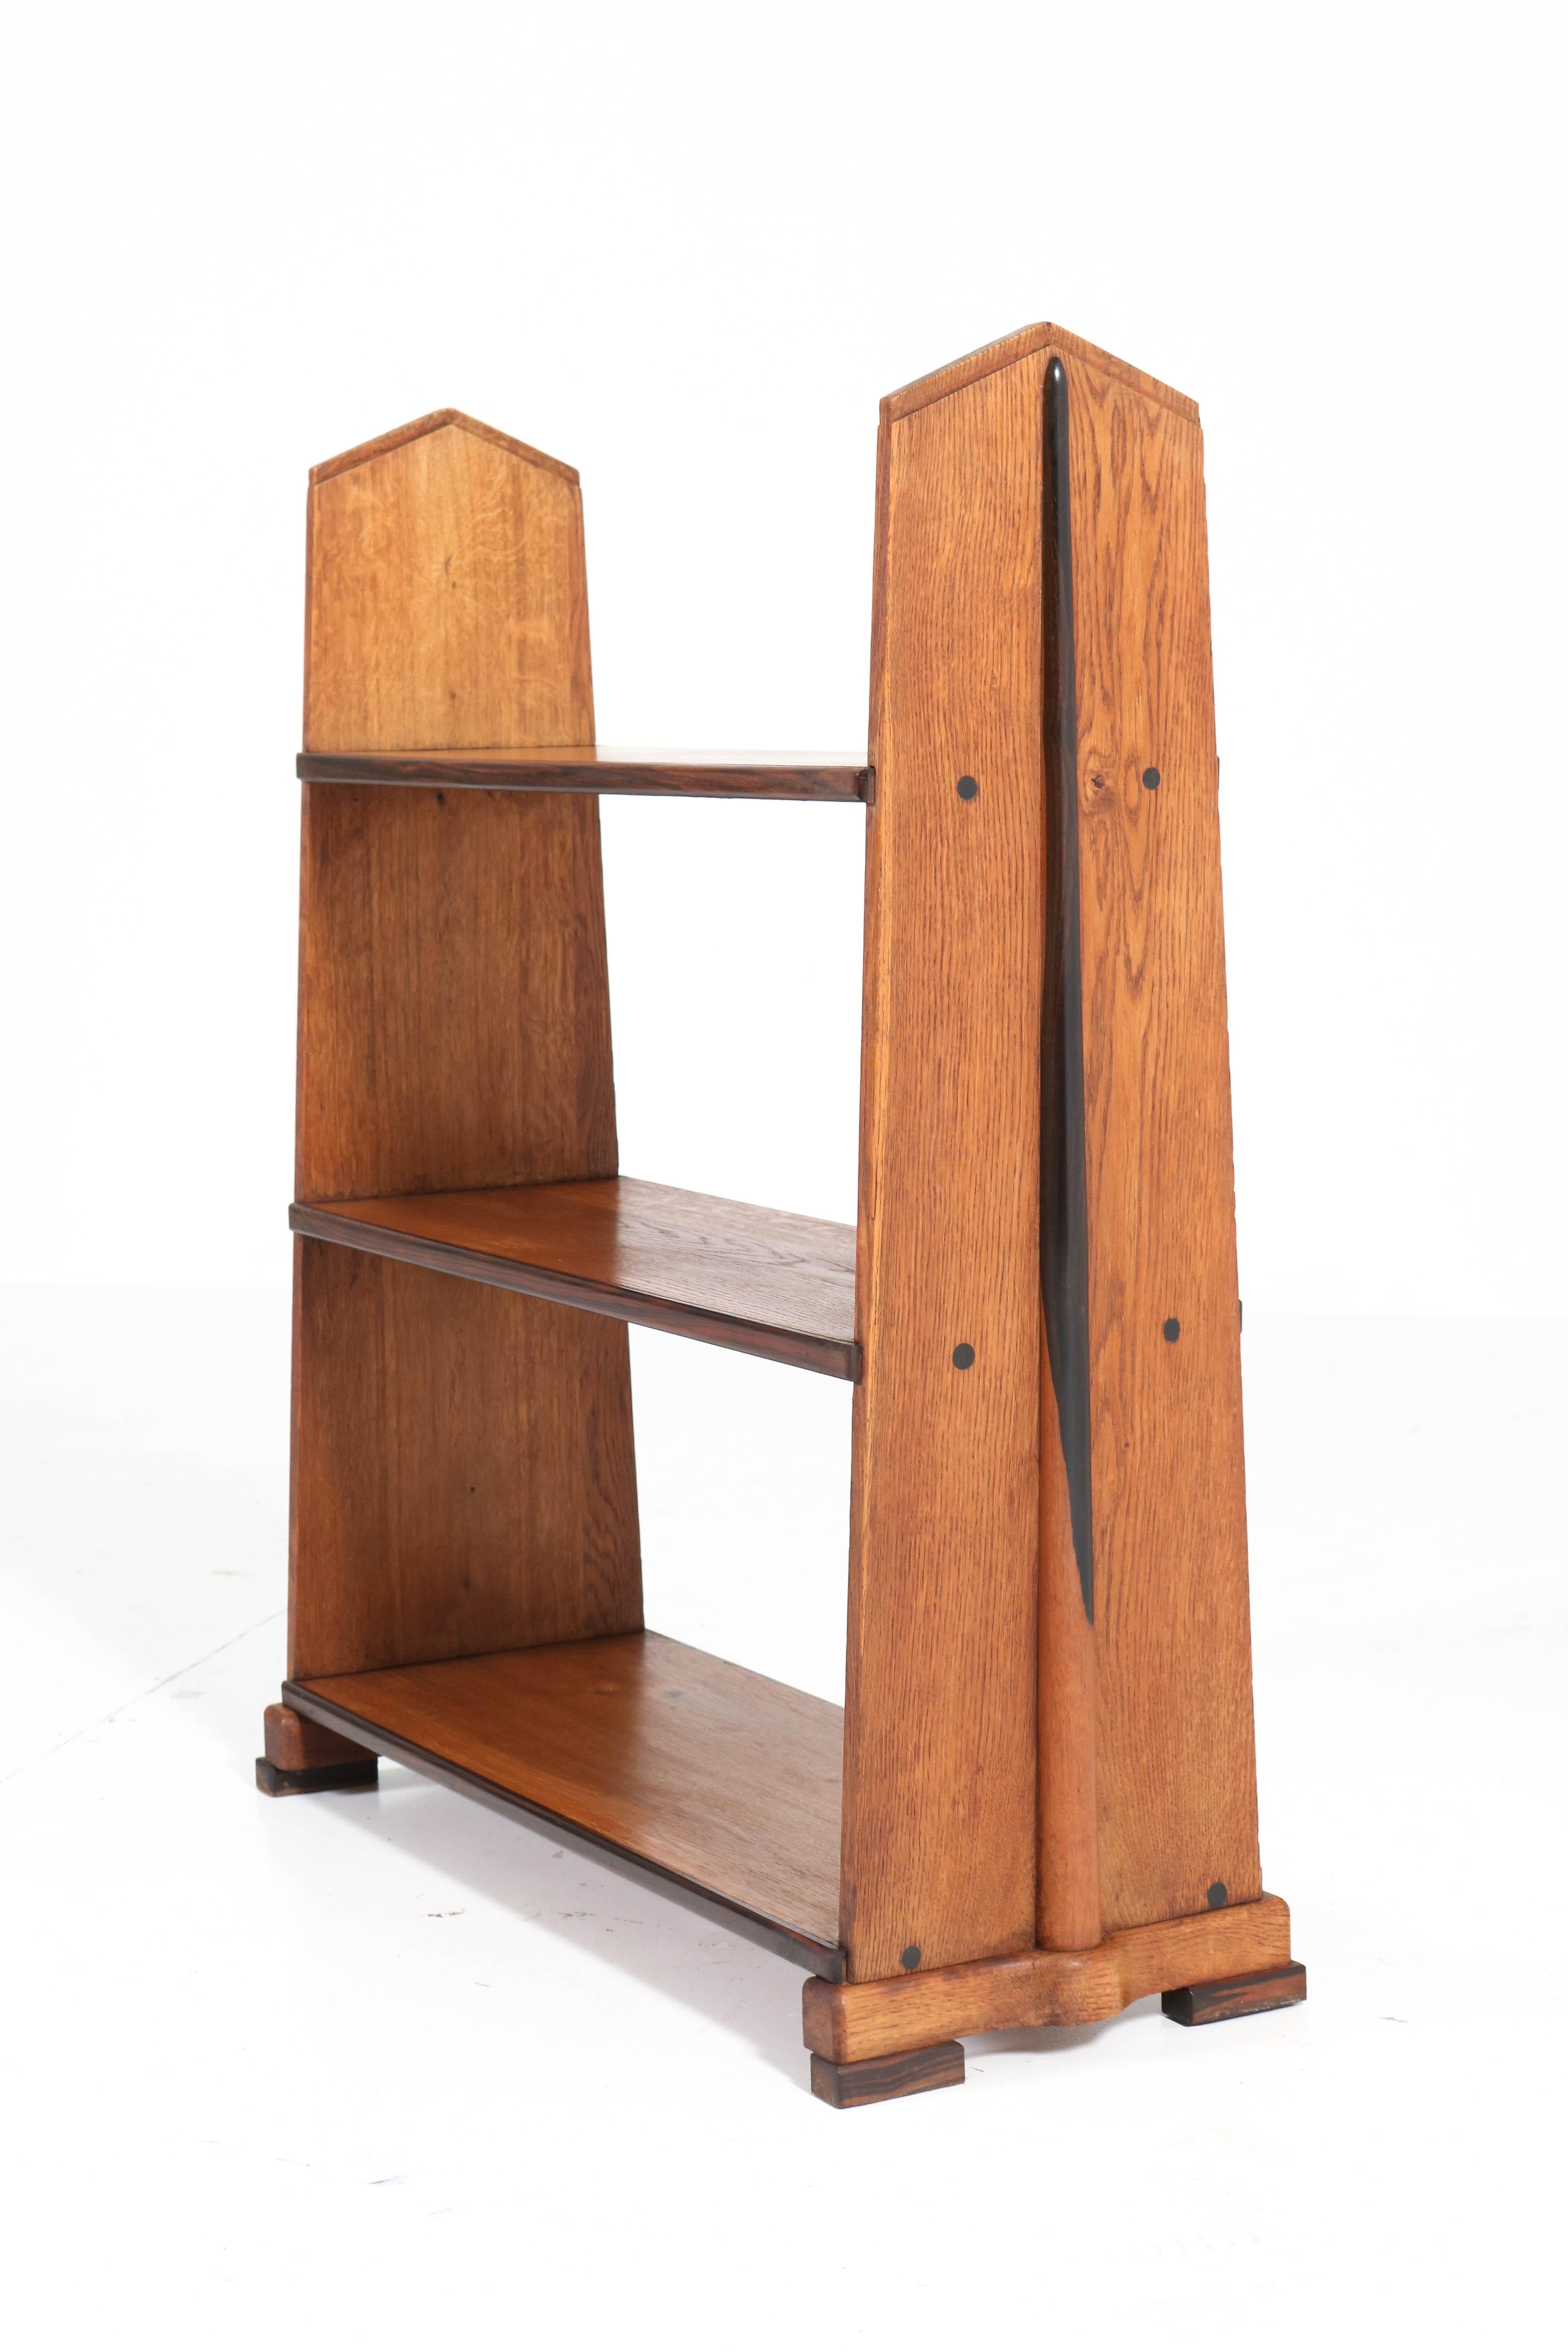 Stunning and rare Art Deco Amsterdam School open bookcase.
Design attributed to P.E.L. Izeren for Genneper Molen.
Striking Dutch design from the 1920s.
Solid oak with solid ebony Macassar lining.
In very good original condition with minor wear